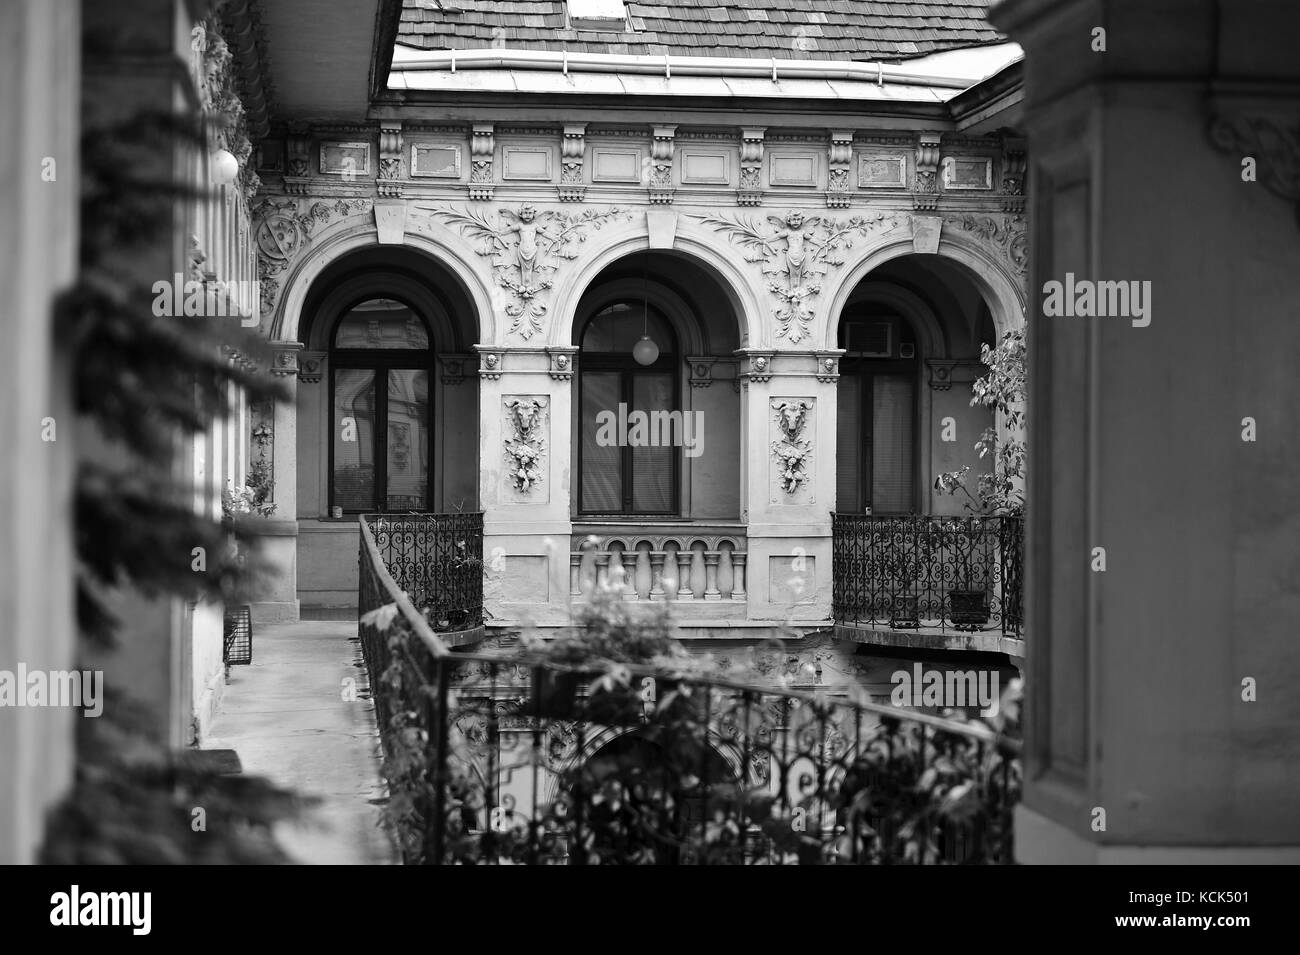 Monochrome picture of courtyard house in Europe Stock Photo